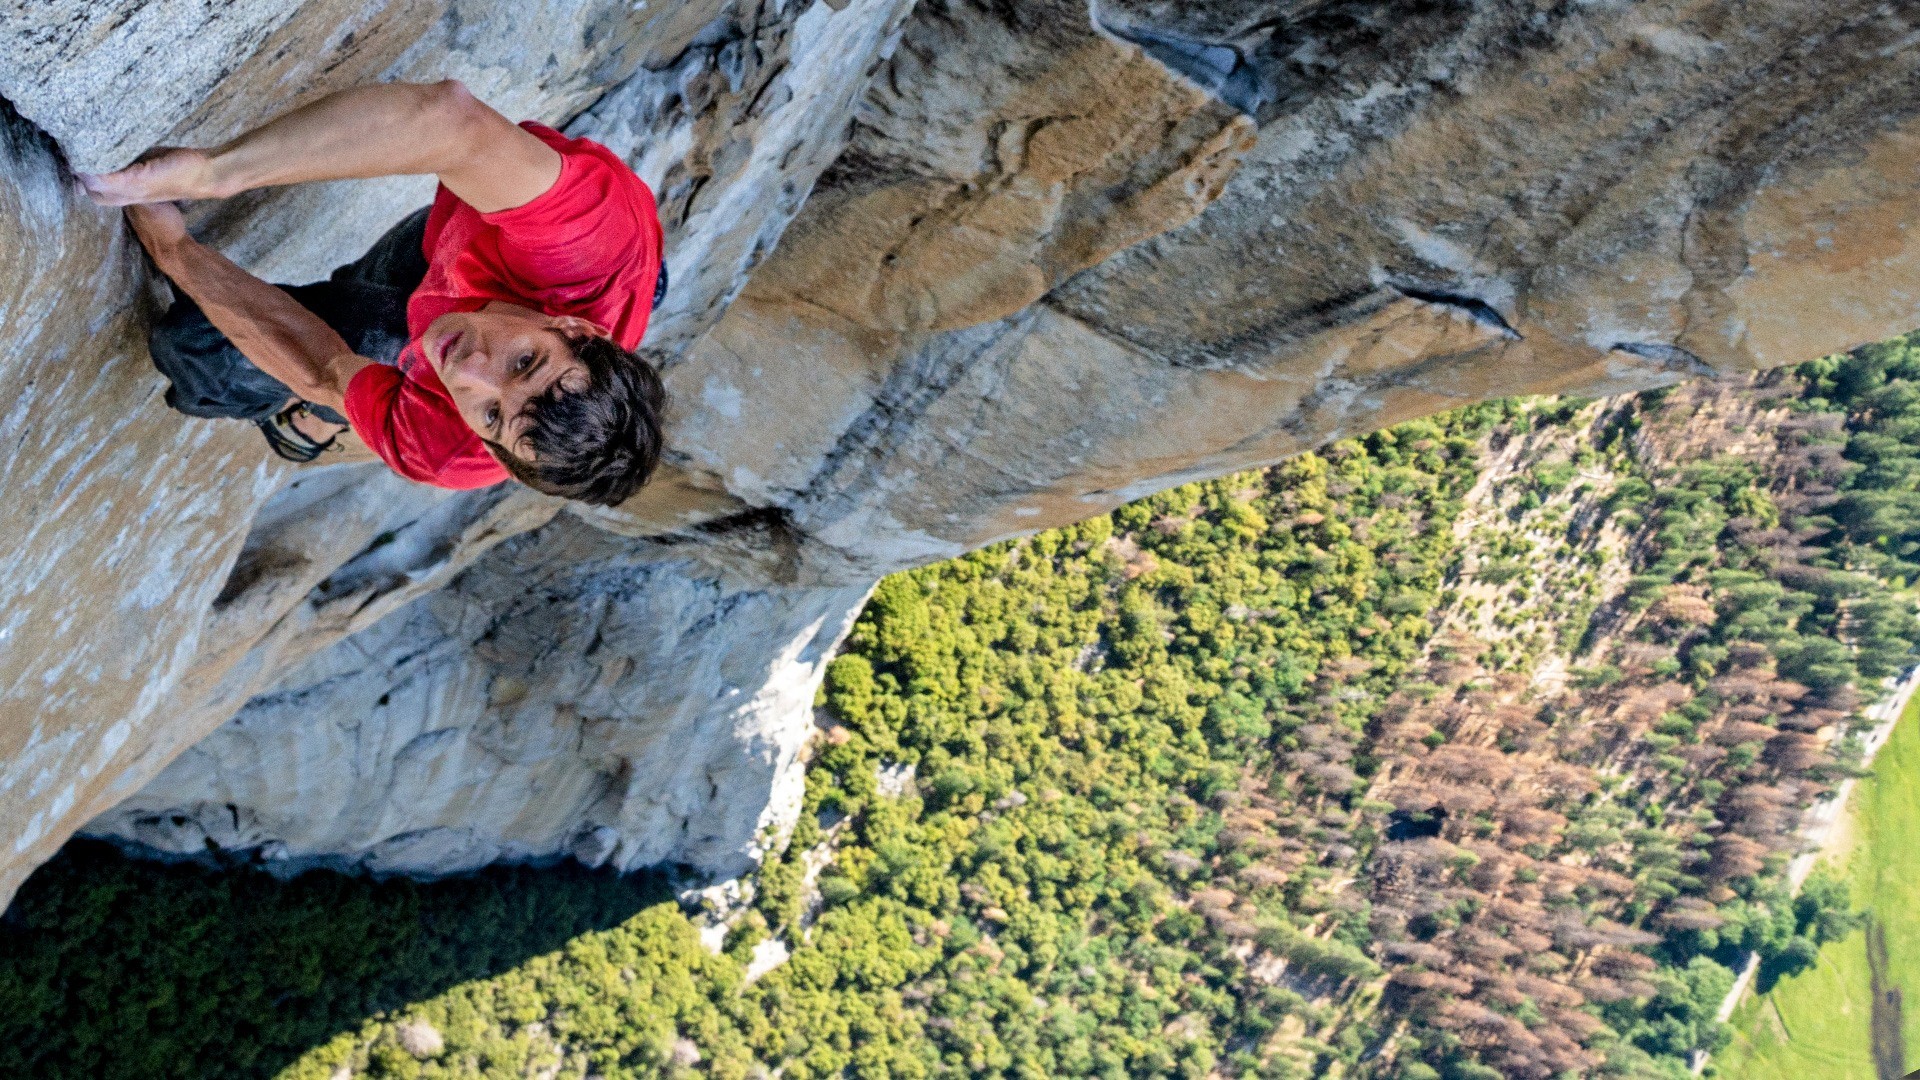 Film for Thought: FREE SOLO